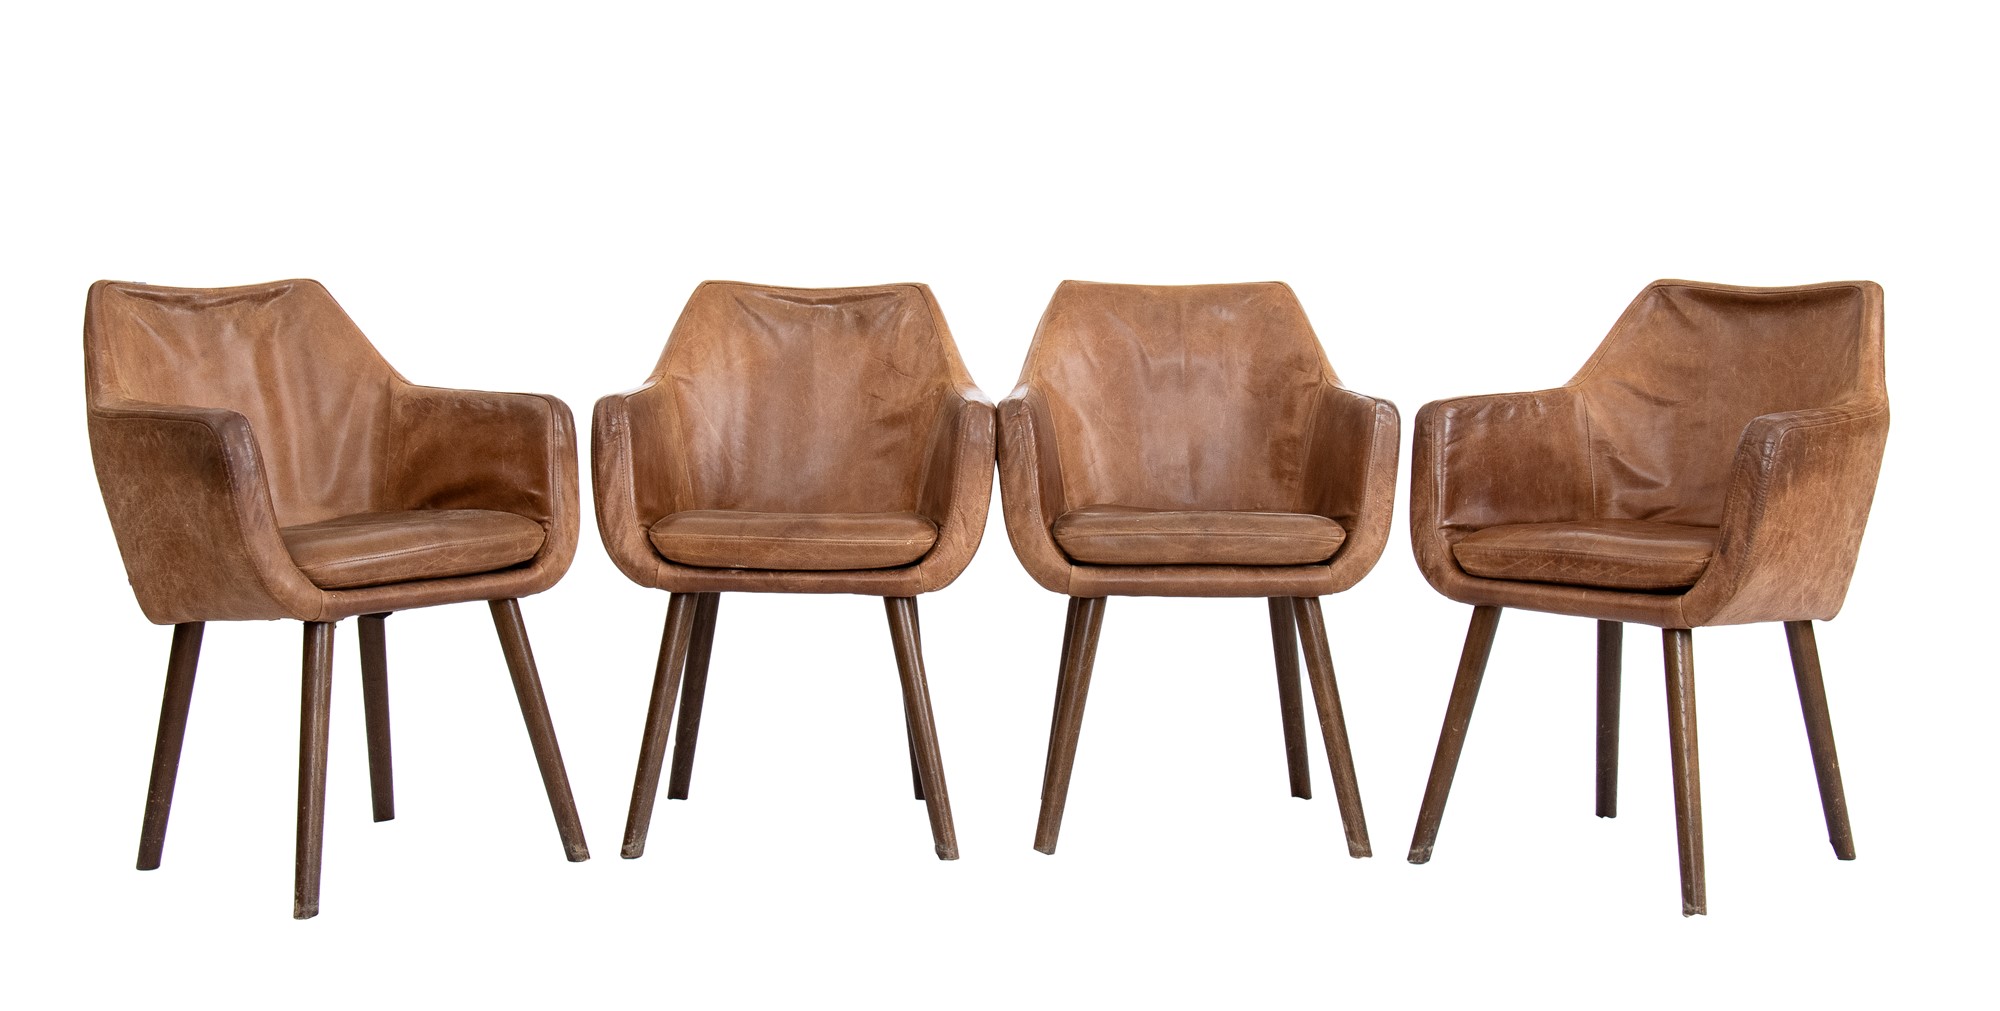 4 leather chairs. 20th century English manufacture - Image 2 of 19